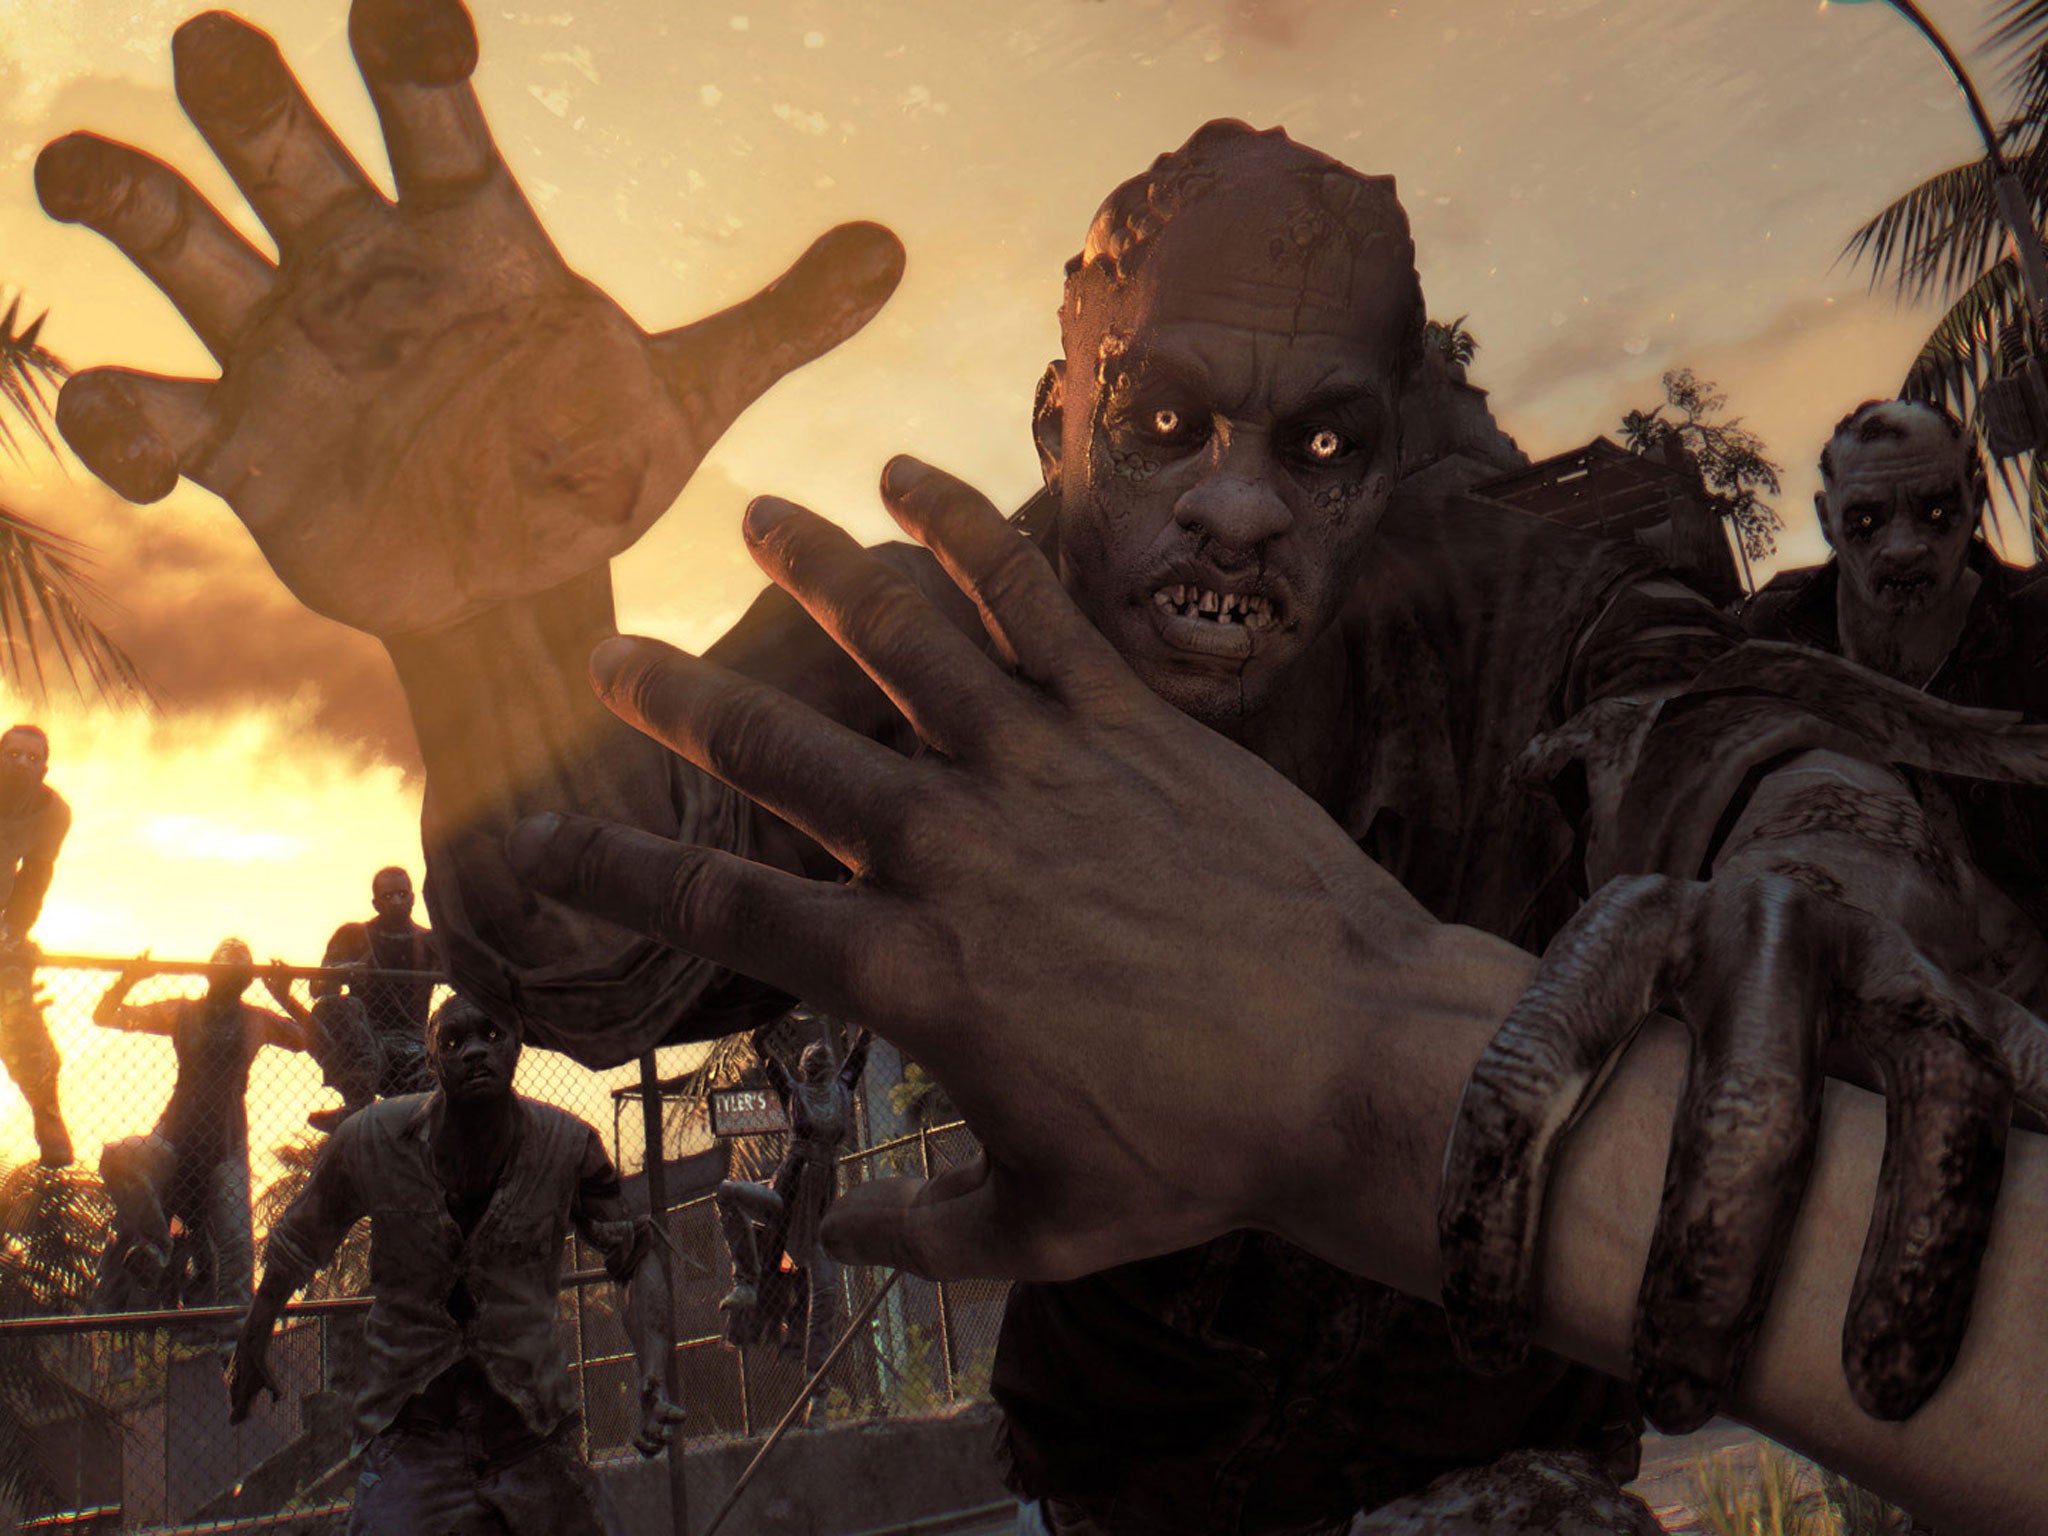 Dying Light continues the theme of first-person zombie survival games